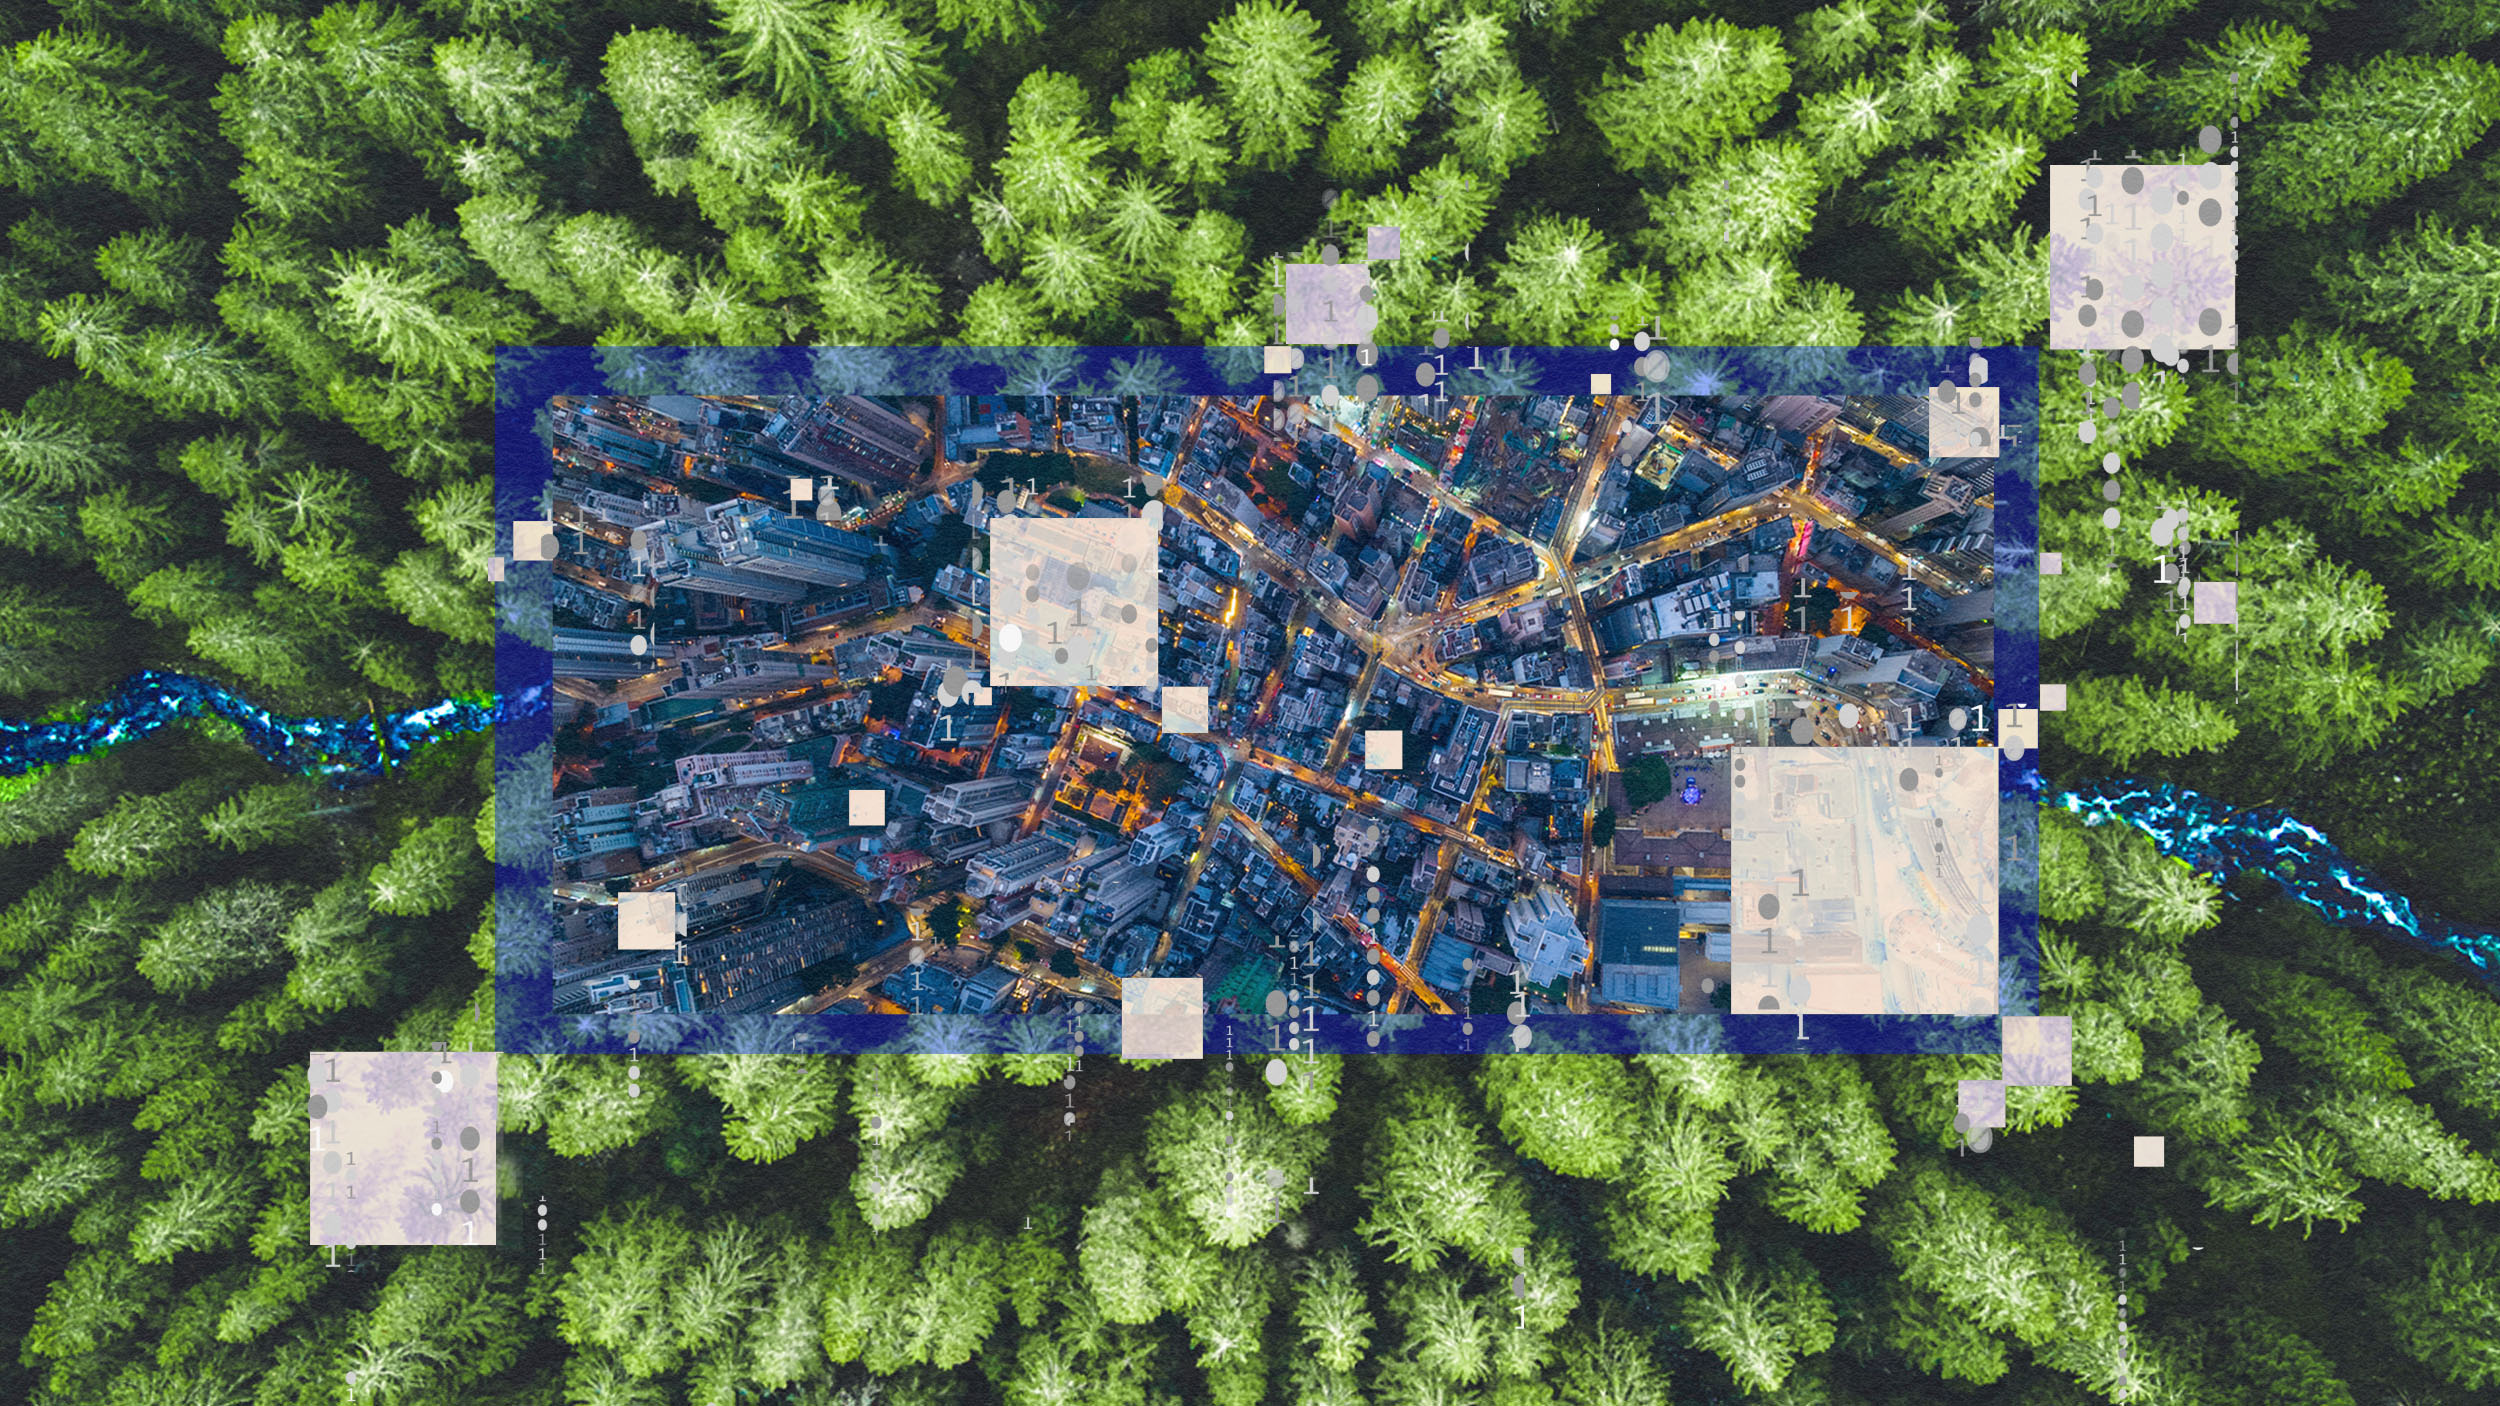 A forest overlaid with an image of a city